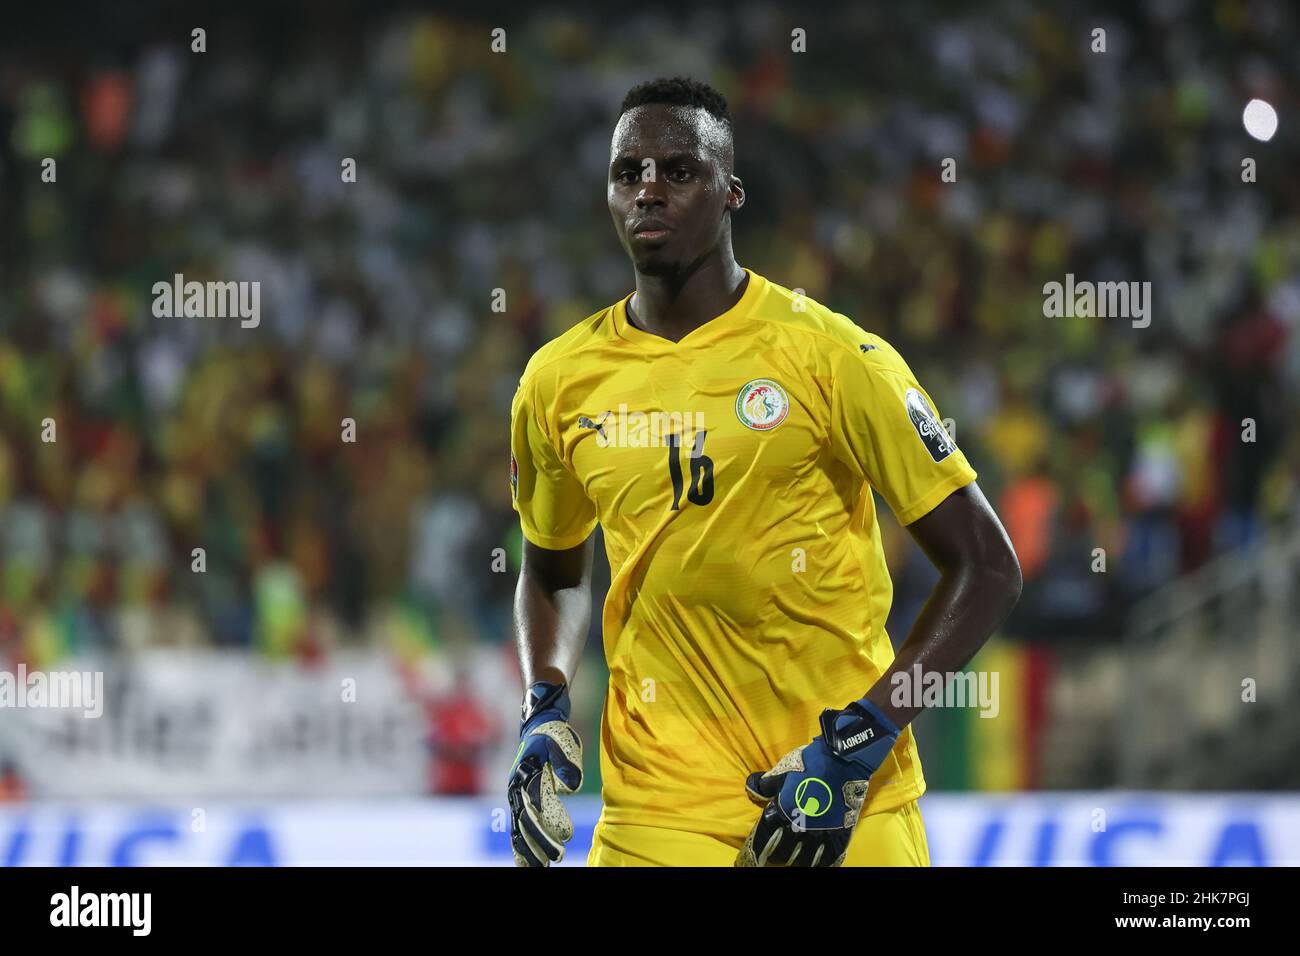 CAMEROON, Yaounde, 02 February 2022 - Edouard Mendy of Senegal during the Africa Cup of Nations play offs semi final match between Burkina Faso and Senegal at Stade Ahmadou Ahidjo,Yaounde, Cameroon, 02/02/2022/ Photo by SF Stock Photo